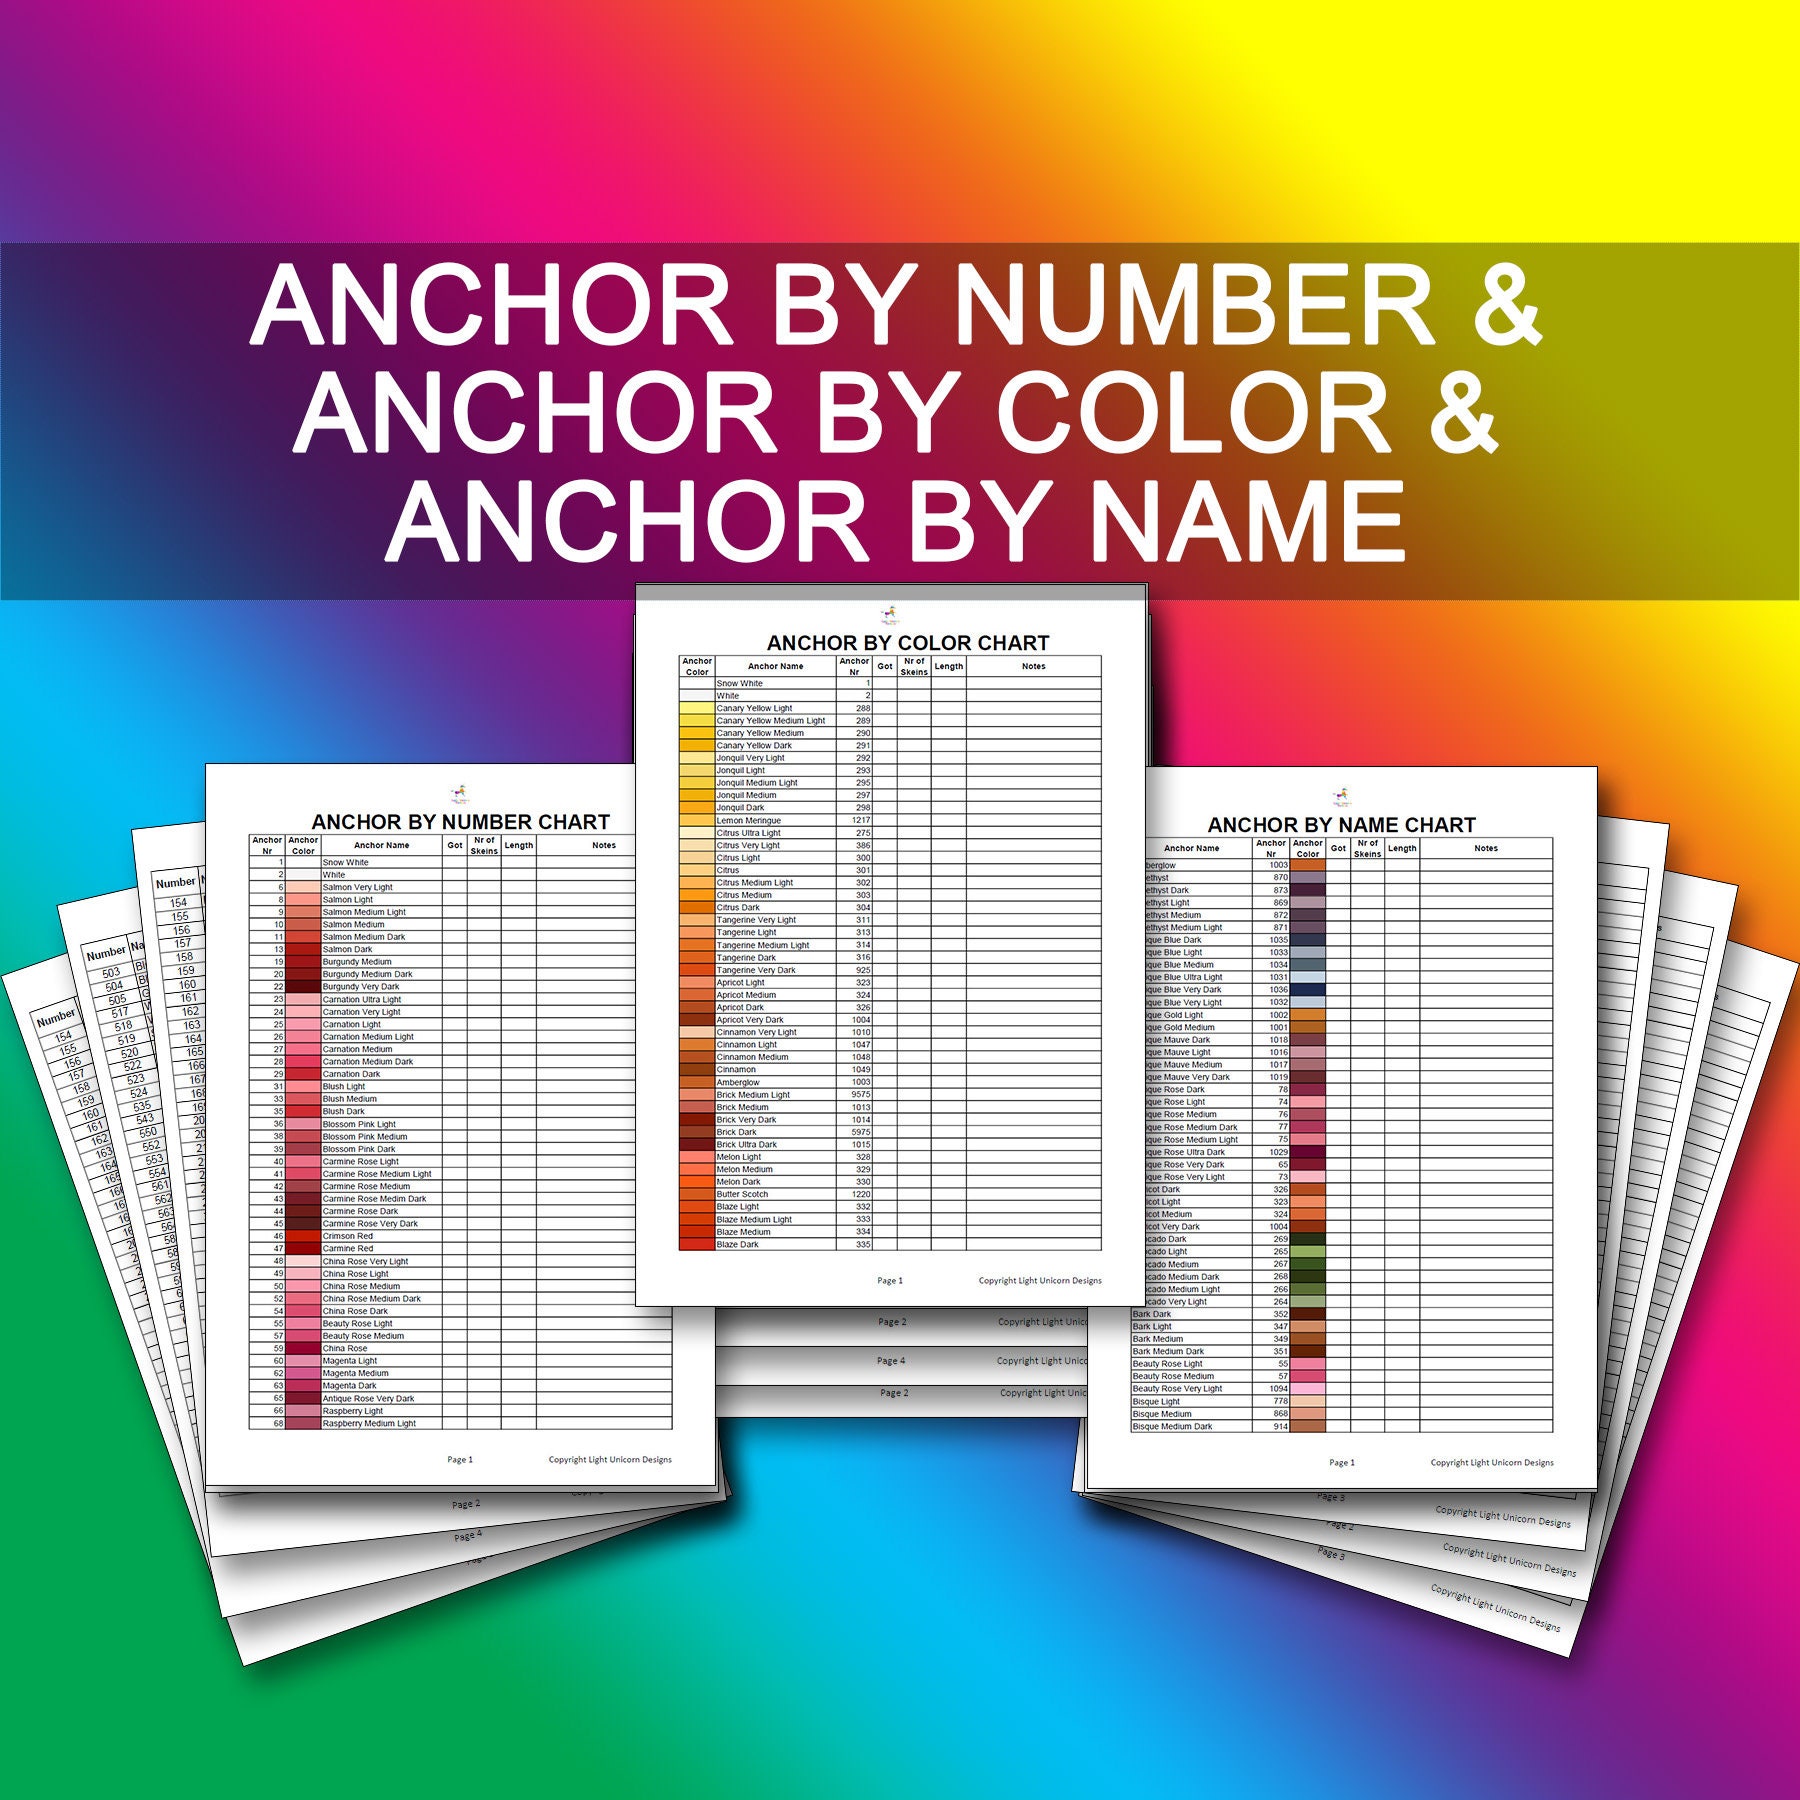 DMC Embroidery Floss Colour Chart: Names, Codes, Shades, and Columns to  Stick Threads by Dmcart Press